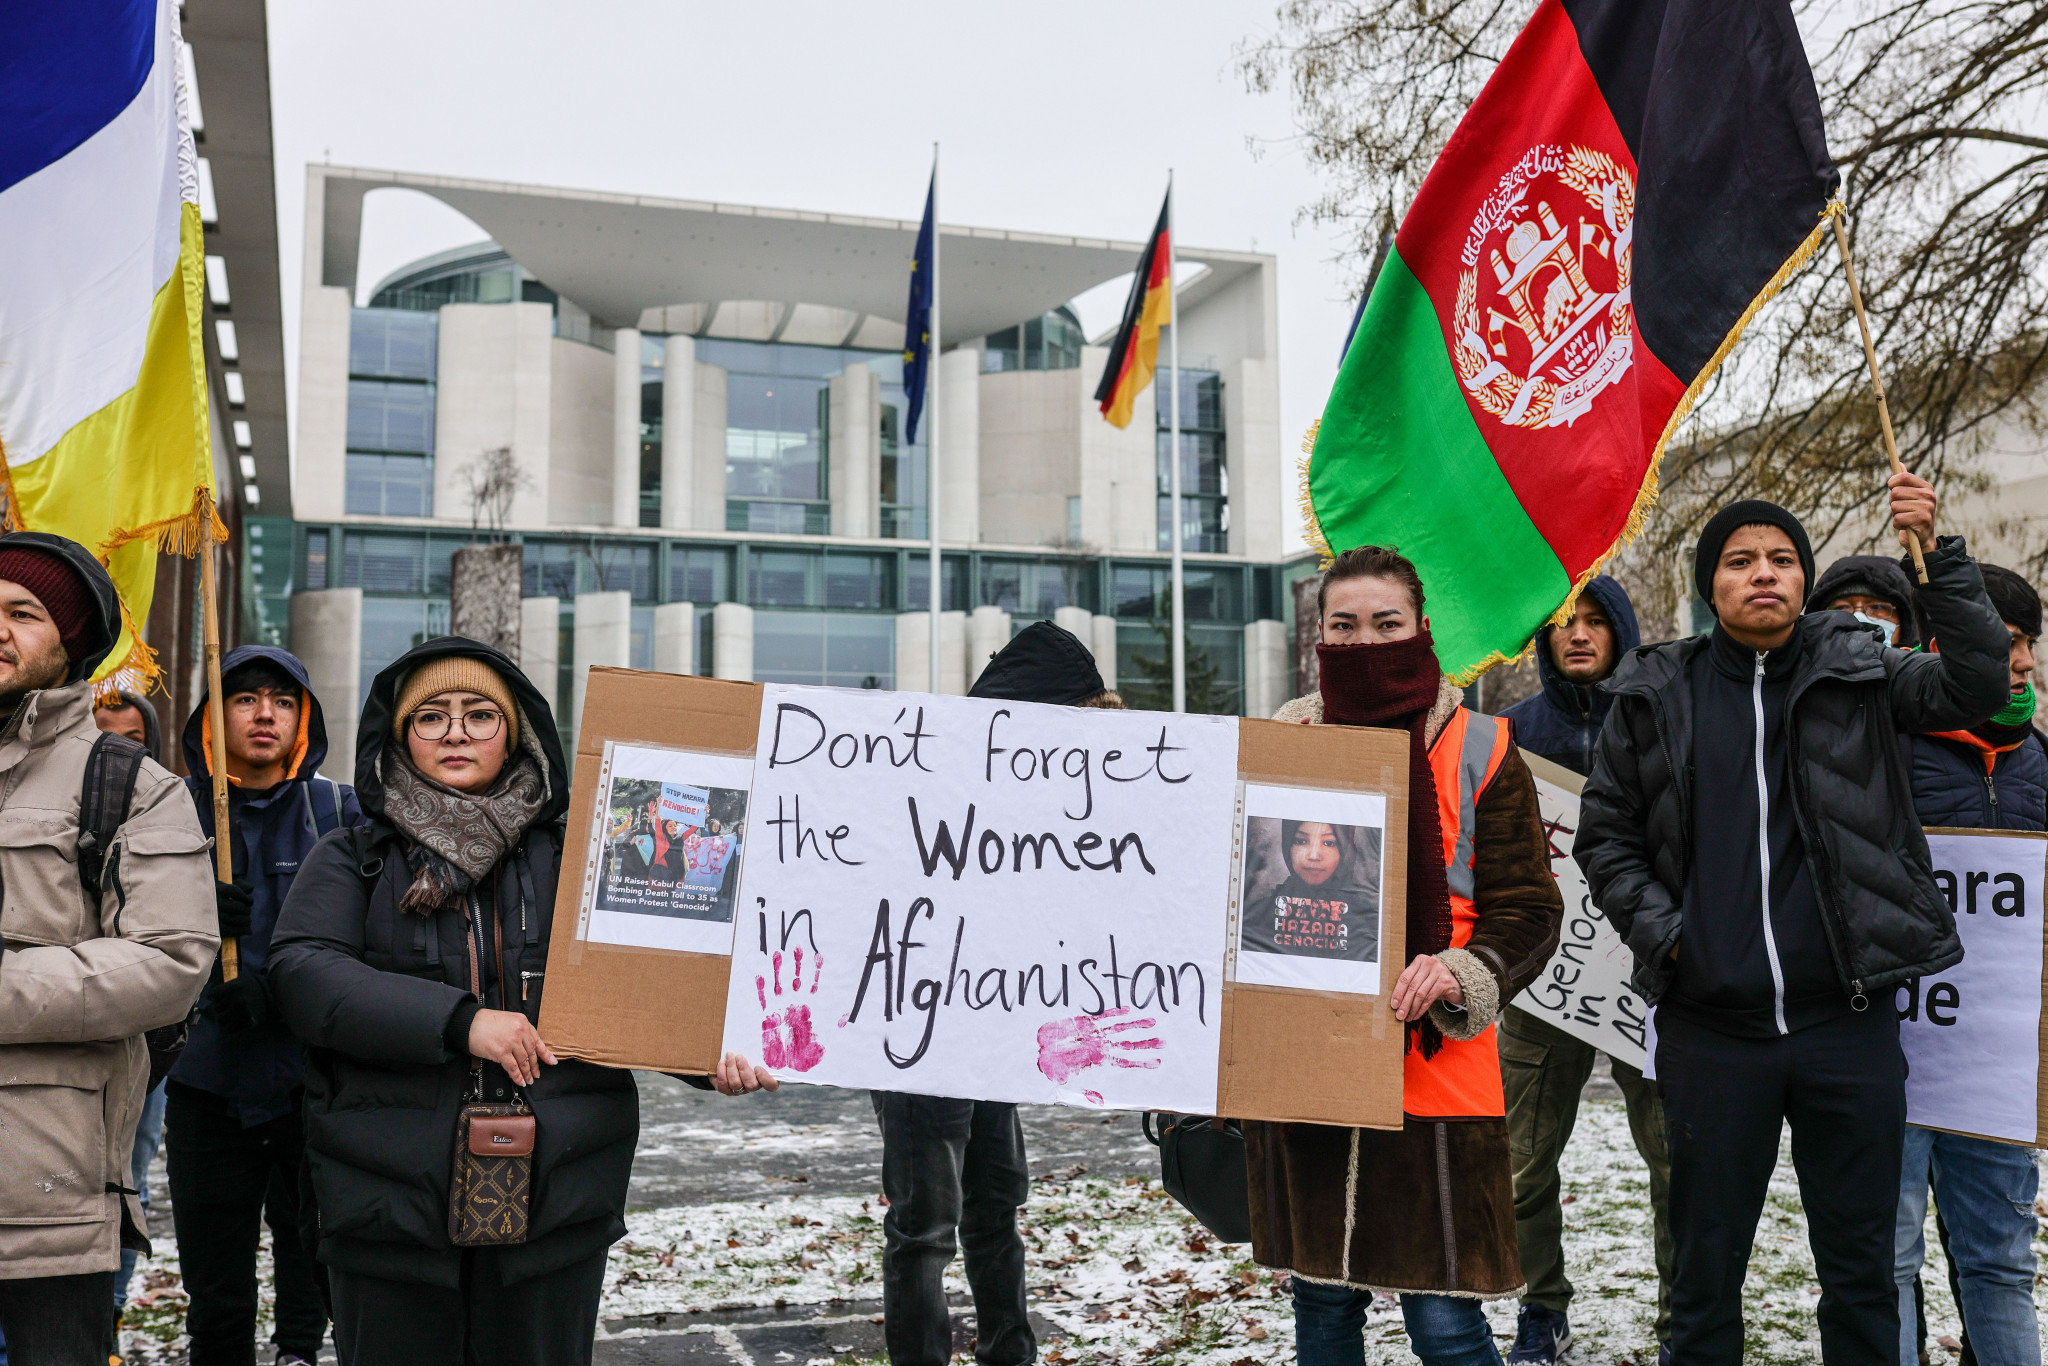 The IOC has reiterated its call for the reversal on restrictions of safe access to sport for women in Afghanistan ©Getty Images